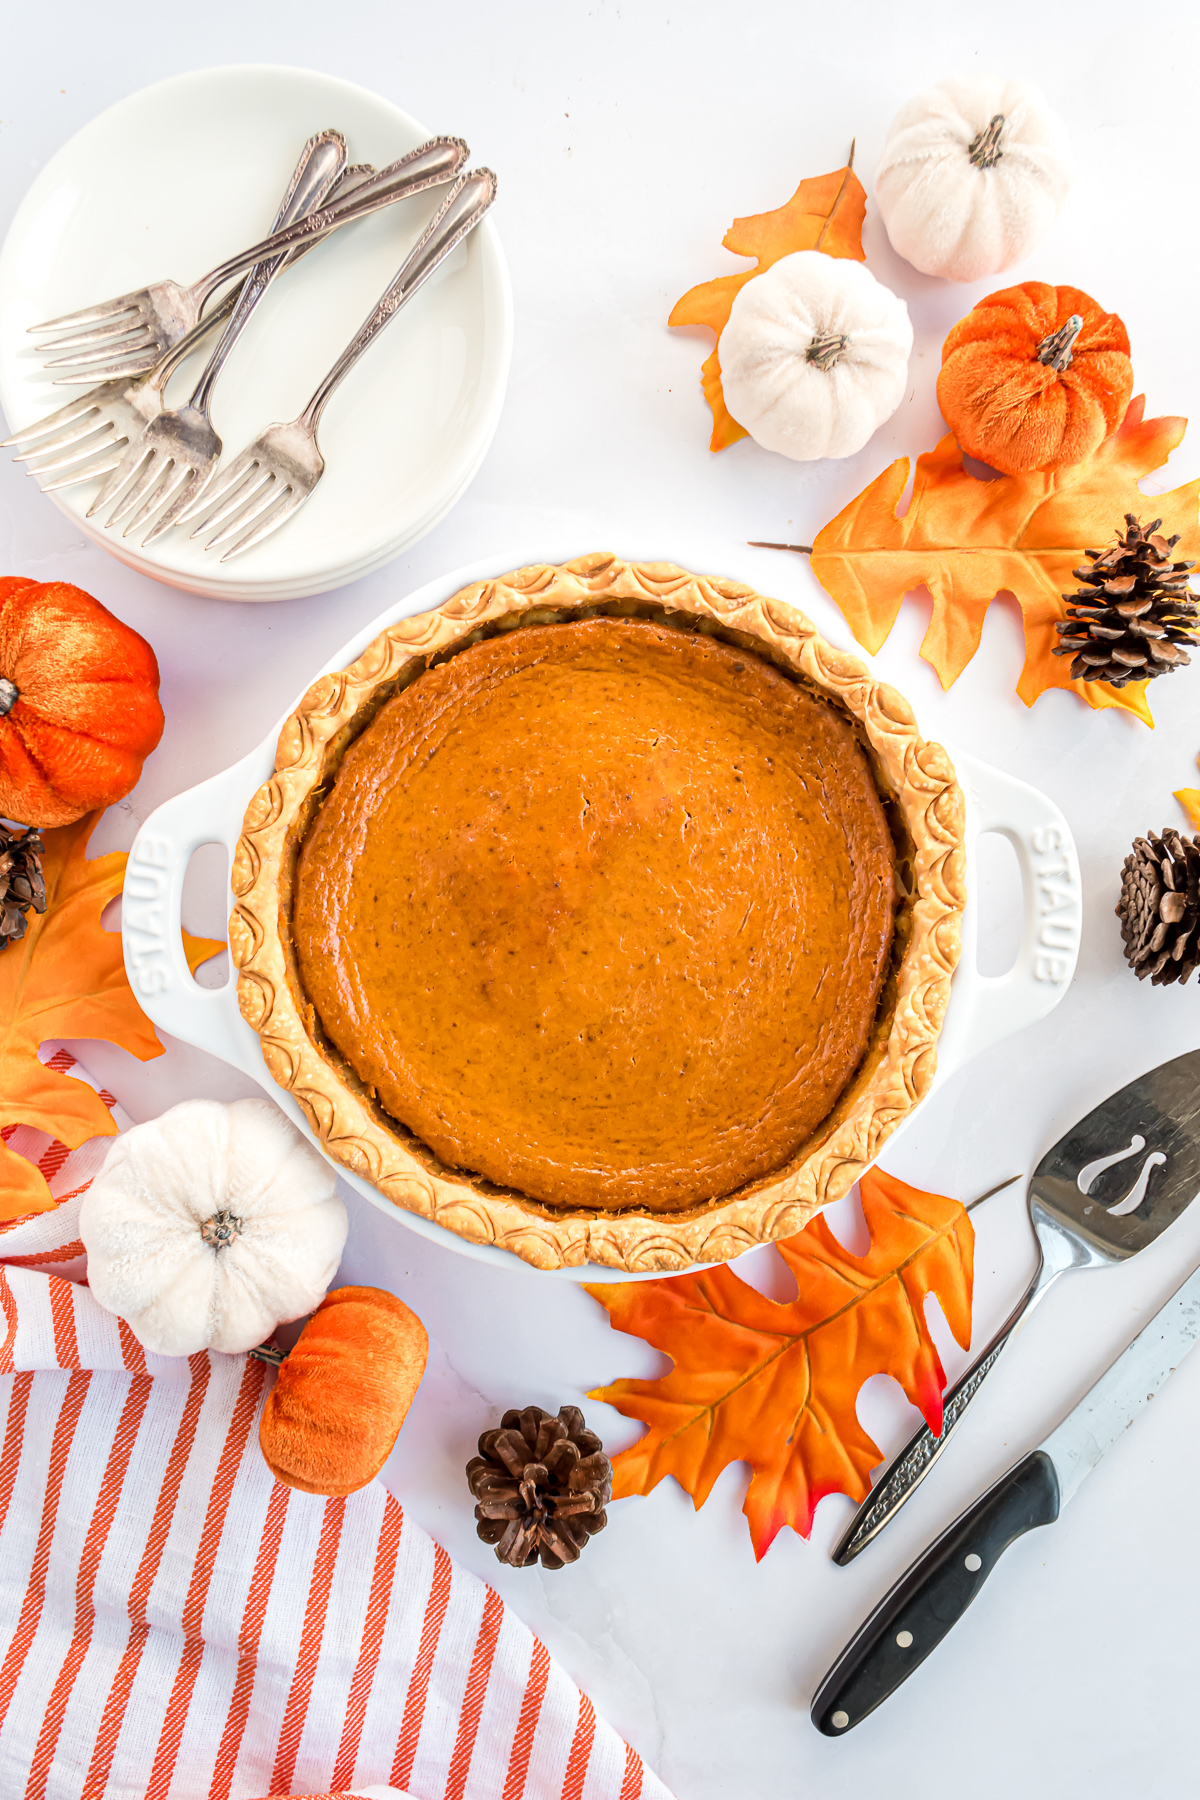 A baked pumpkin pie in a white ceramic pie plate with handles.